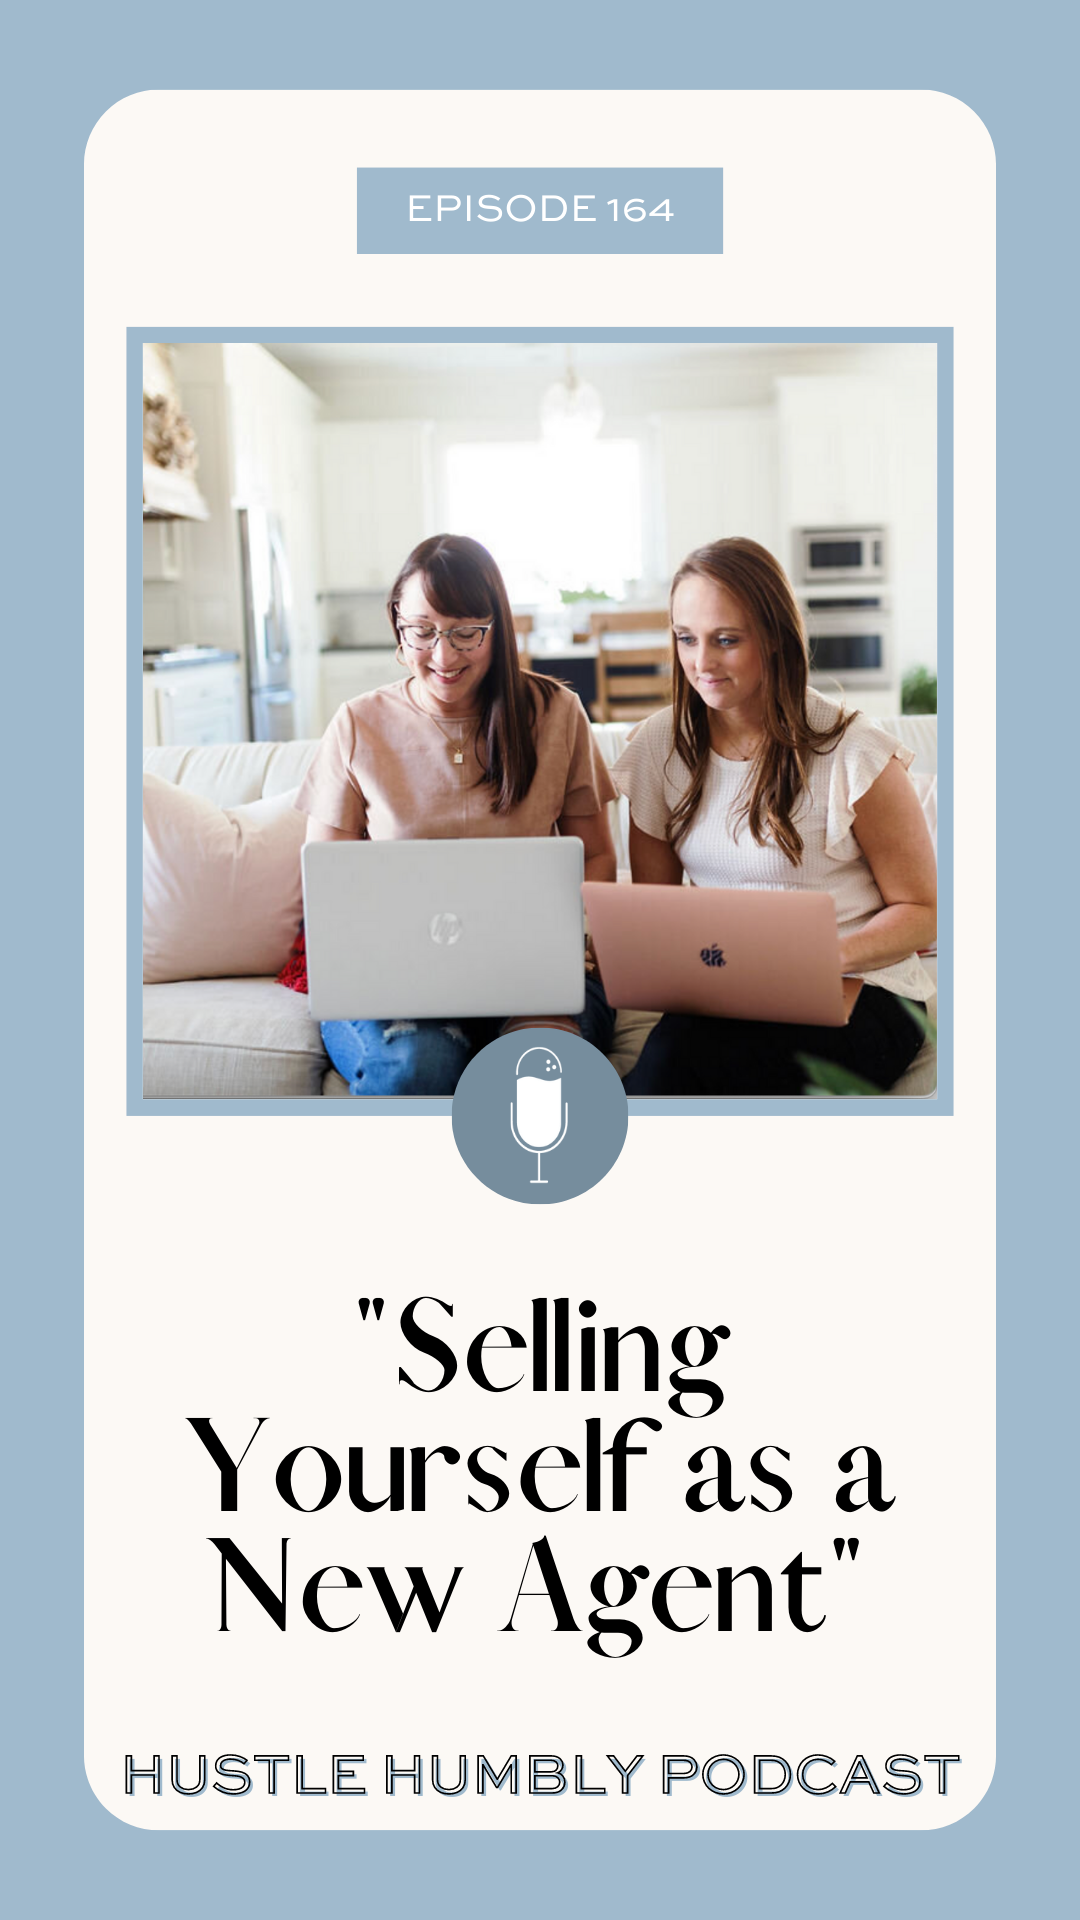 Hustle Humbly Podcast Episode 164: Selling Yourself as a New Agent